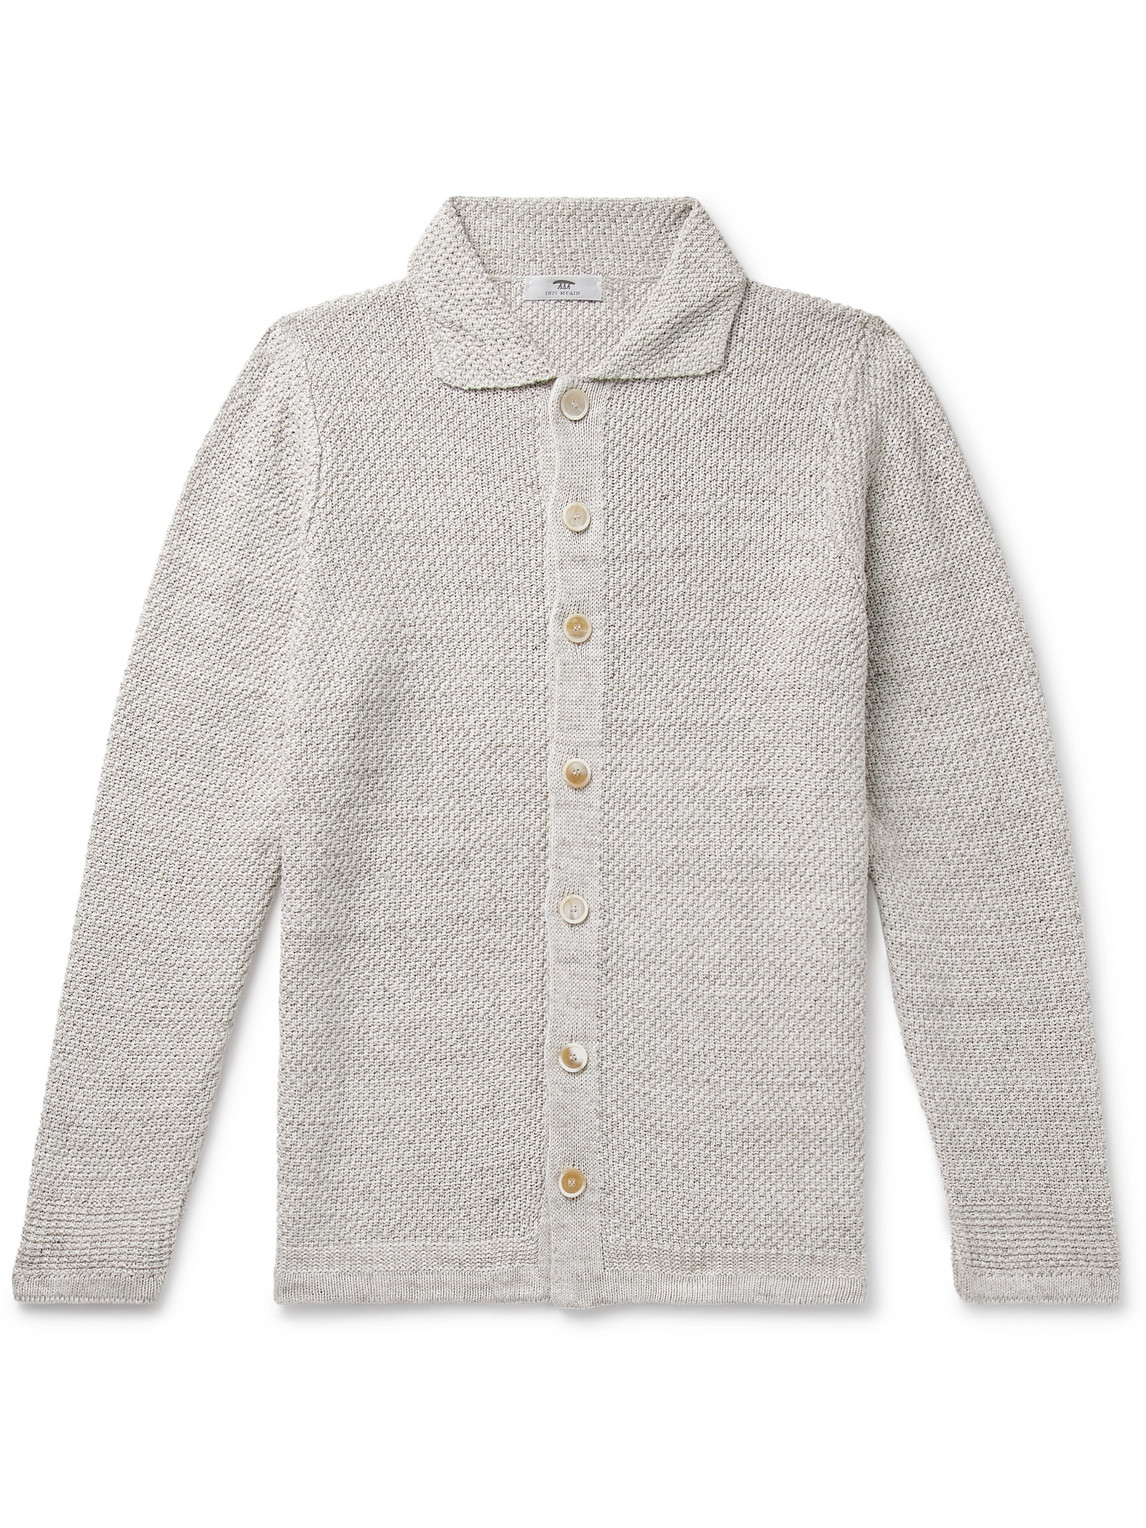 Inis Meain Linen Cardigan In Gray